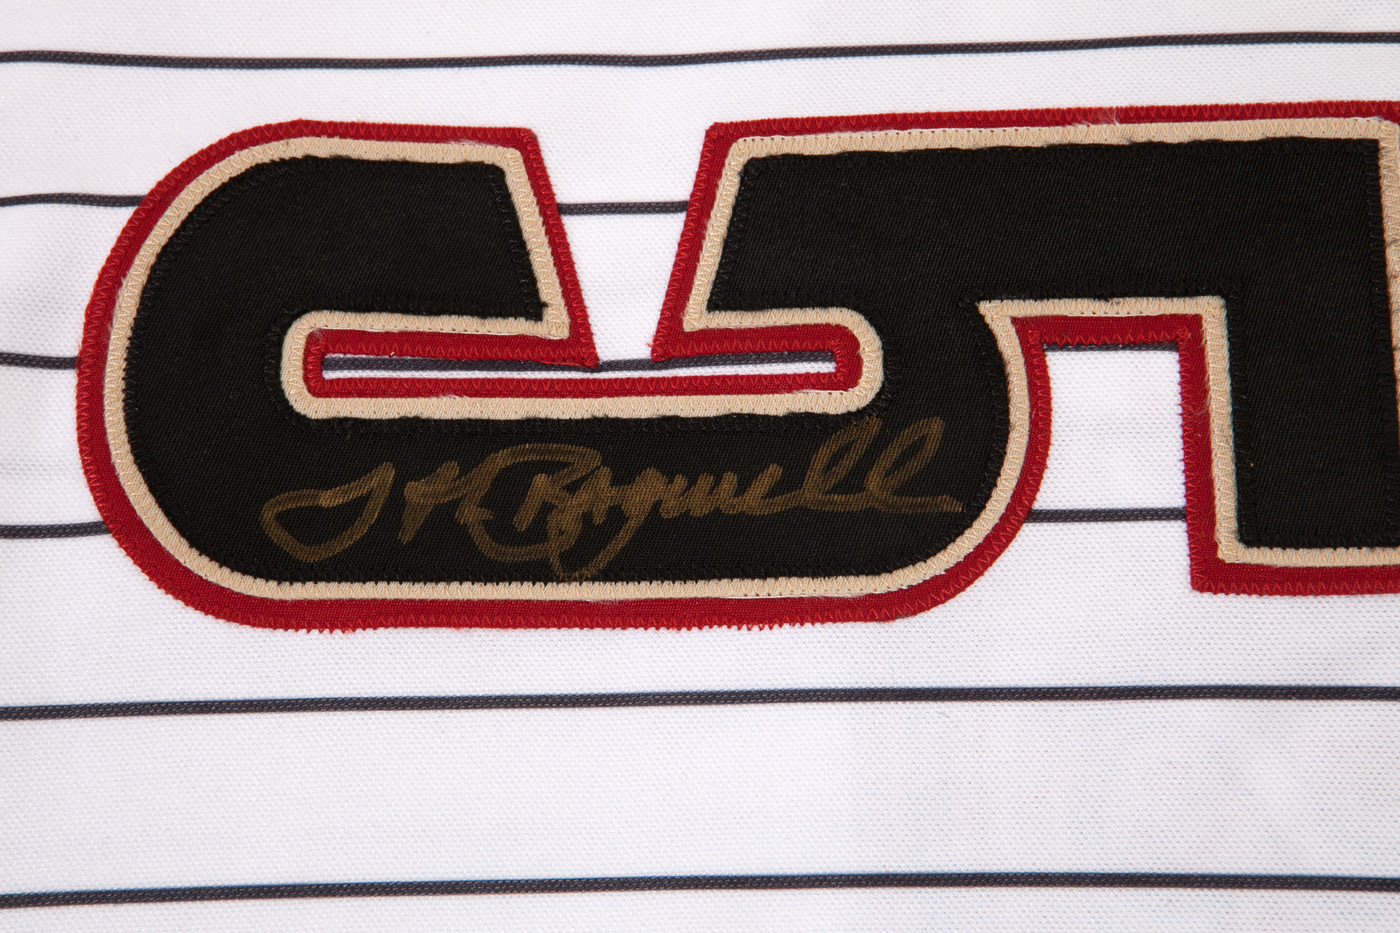 Jeff Bagwell Autographed Jersey White Houston Astros Majestic Cooperst —  Ultimate Autographs